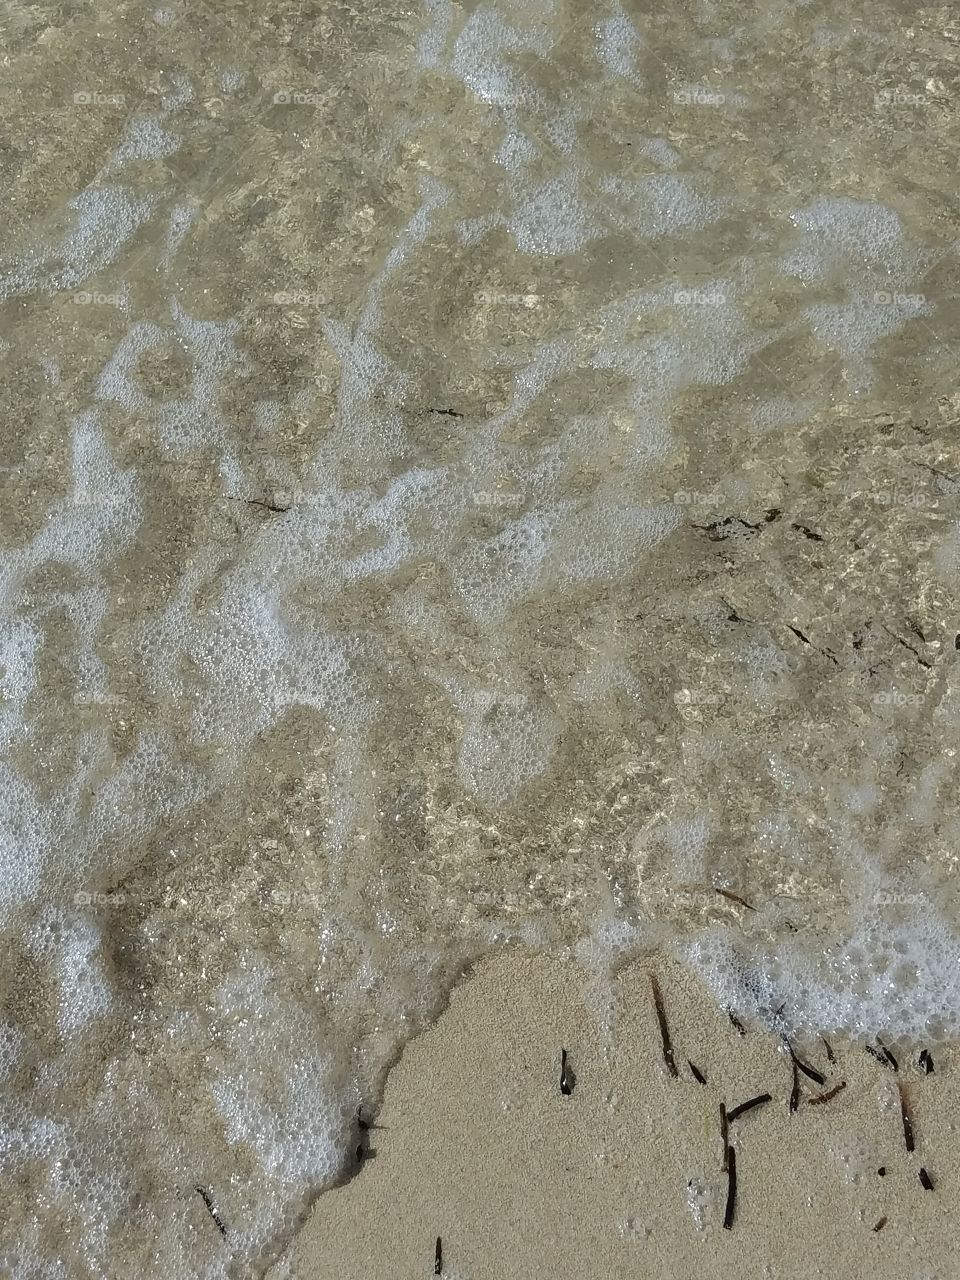 rocks in a clean ocean with sand so clean